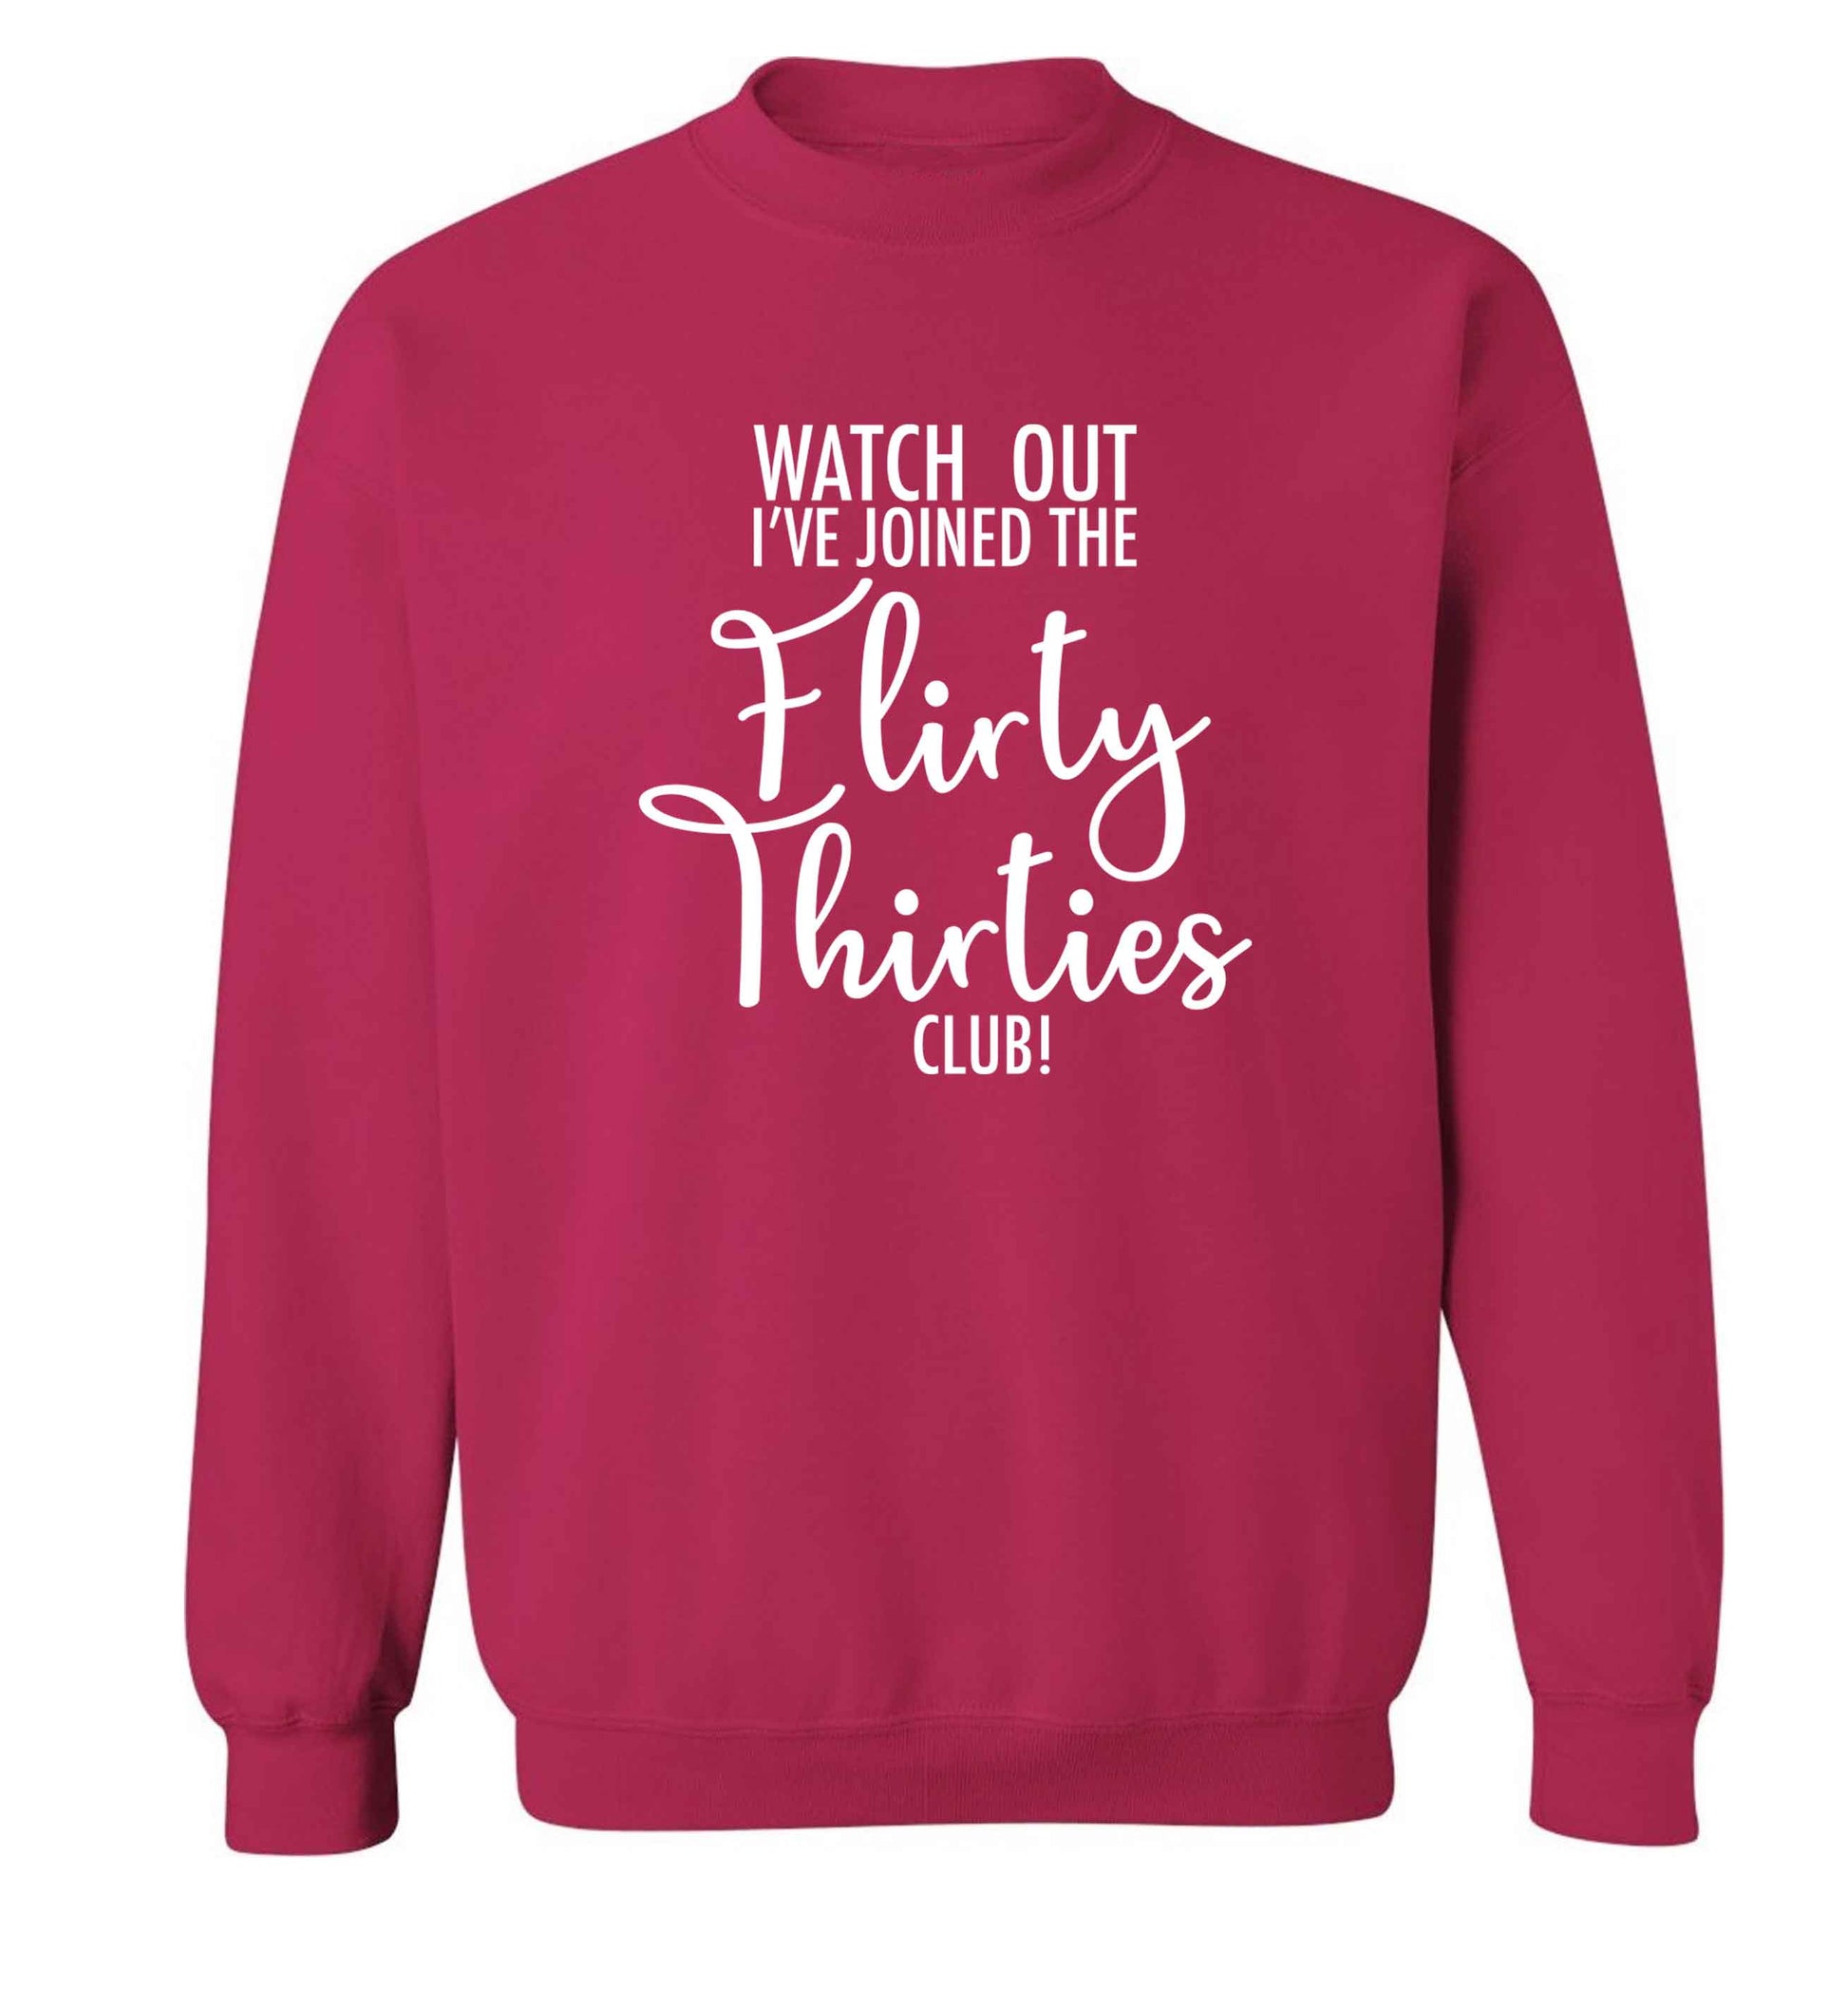 Watch out I've joined the flirty thirties club adult's unisex pink sweater 2XL